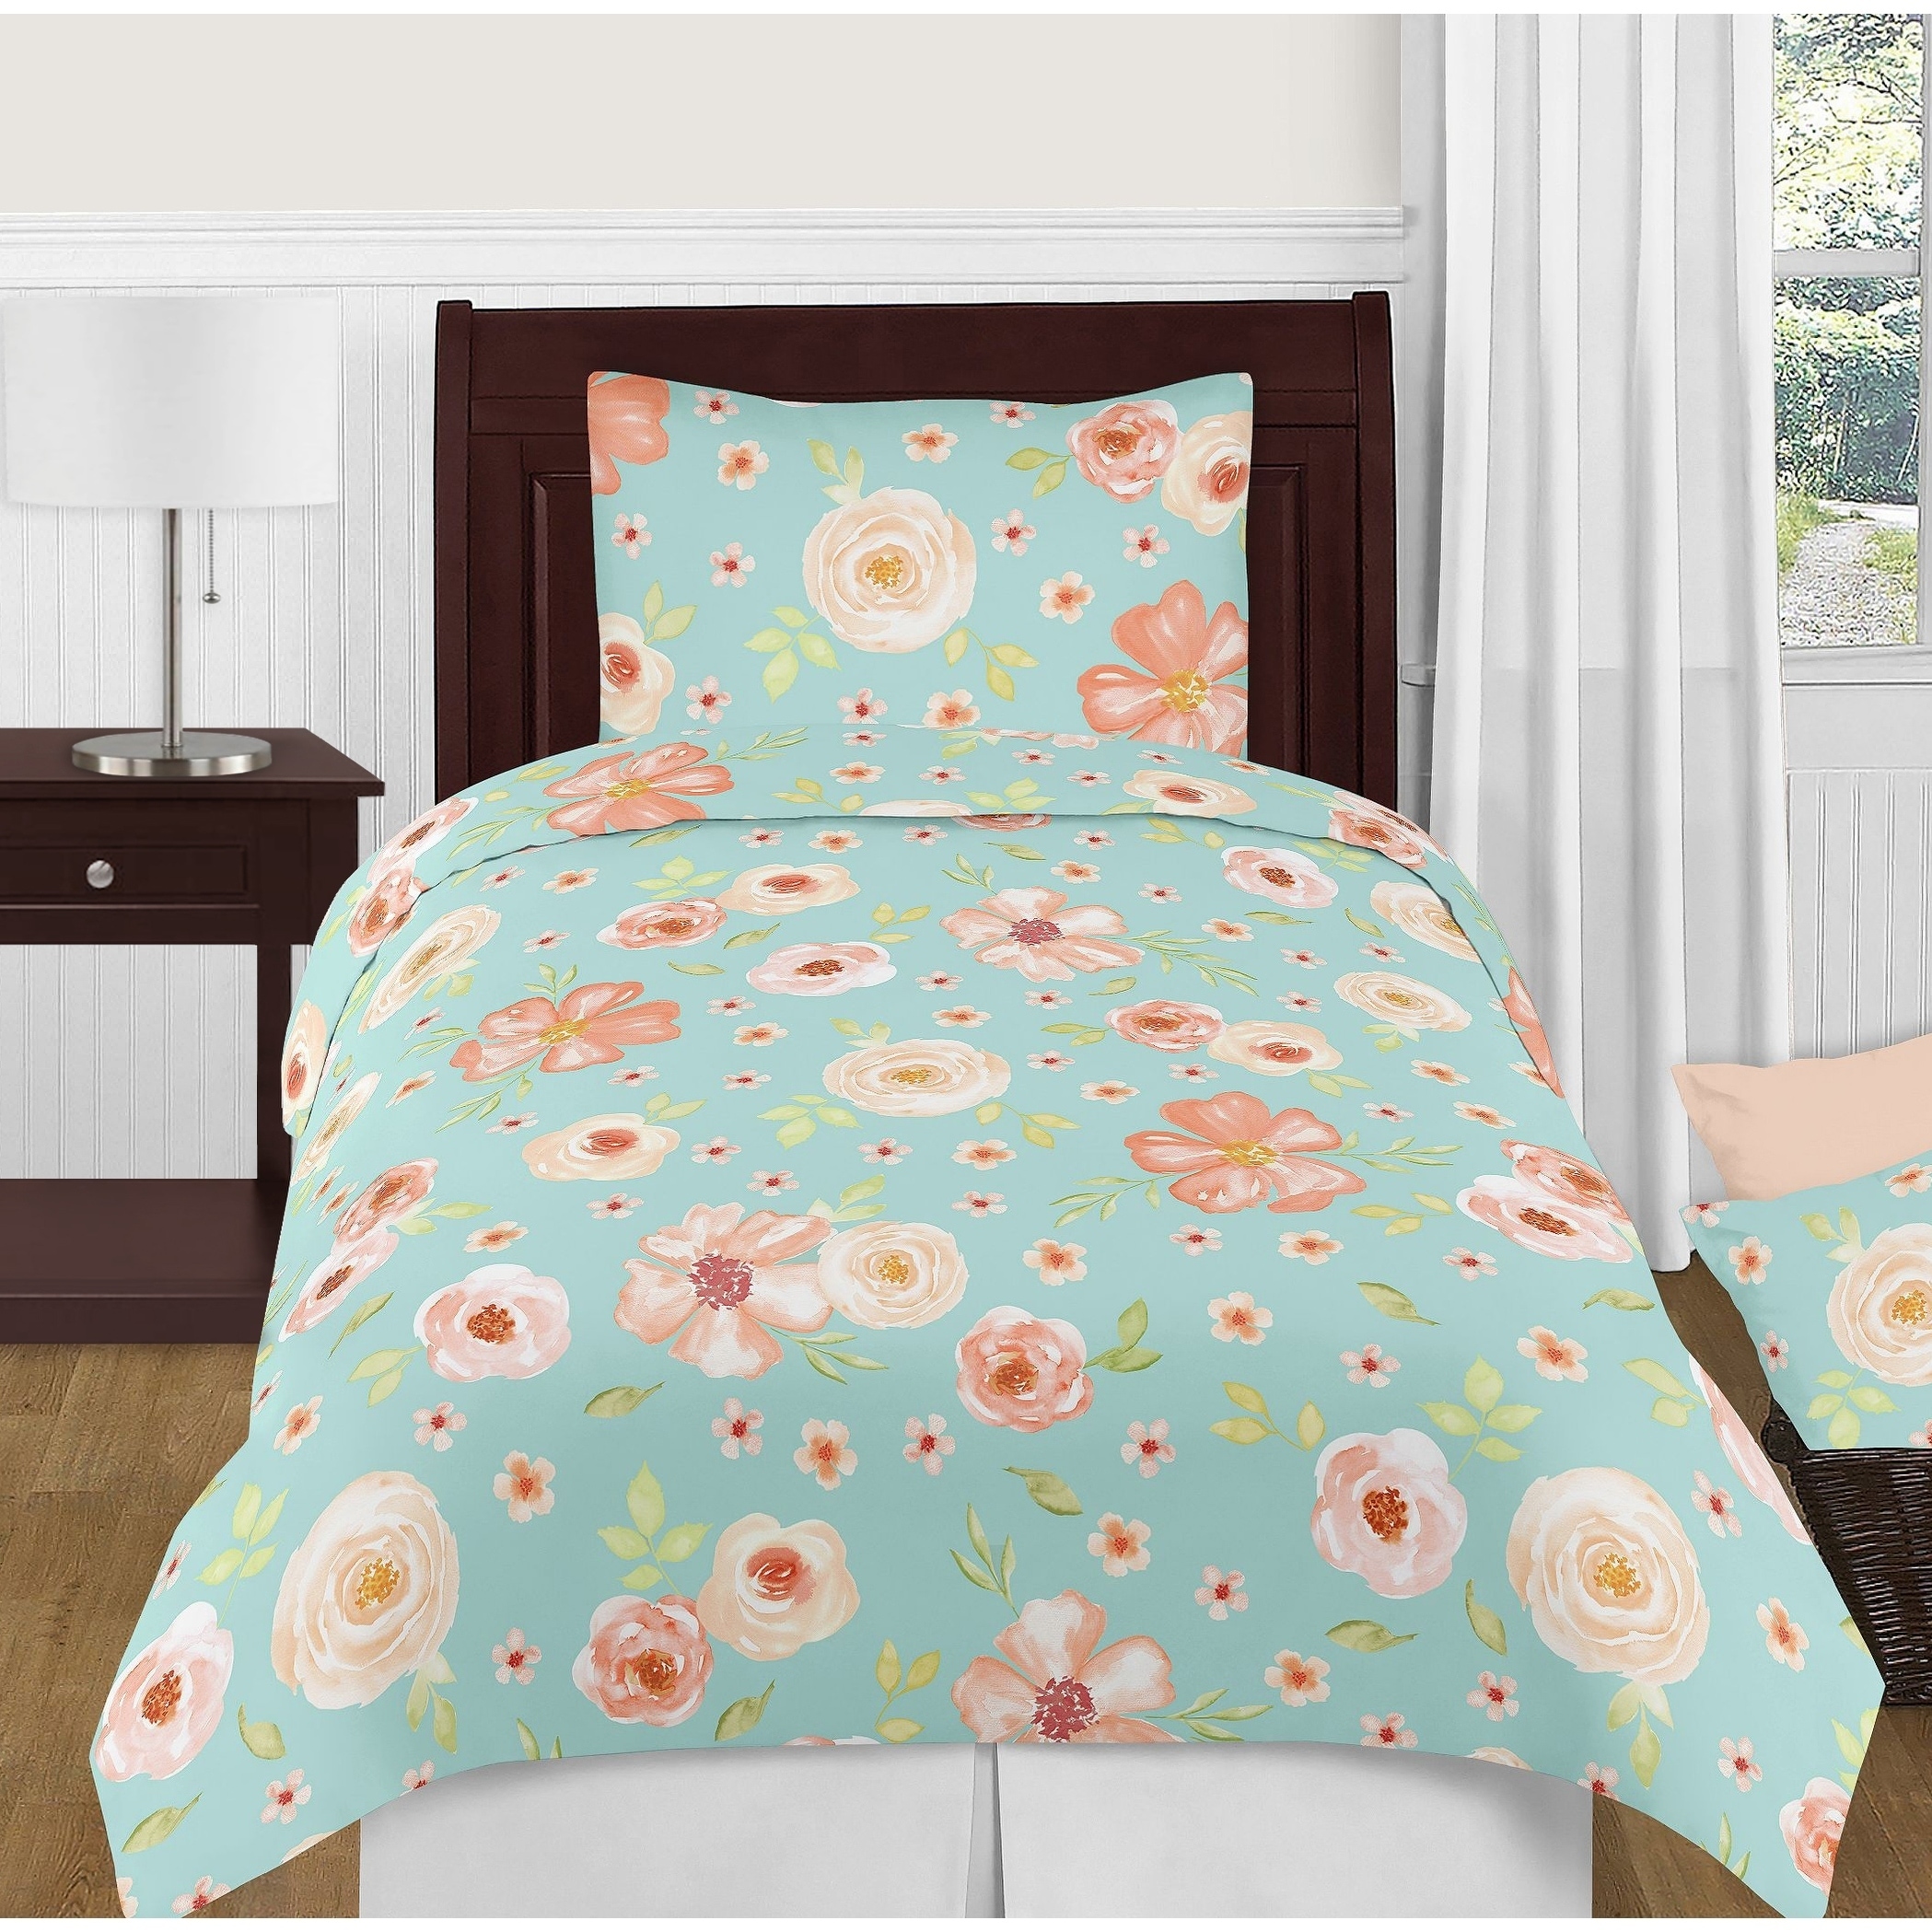 Sweet Jojo Designs Turquoise And Peach Shabby Chic Watercolor Floral Collection Girl 4 Piece Twin Size Comforter Set